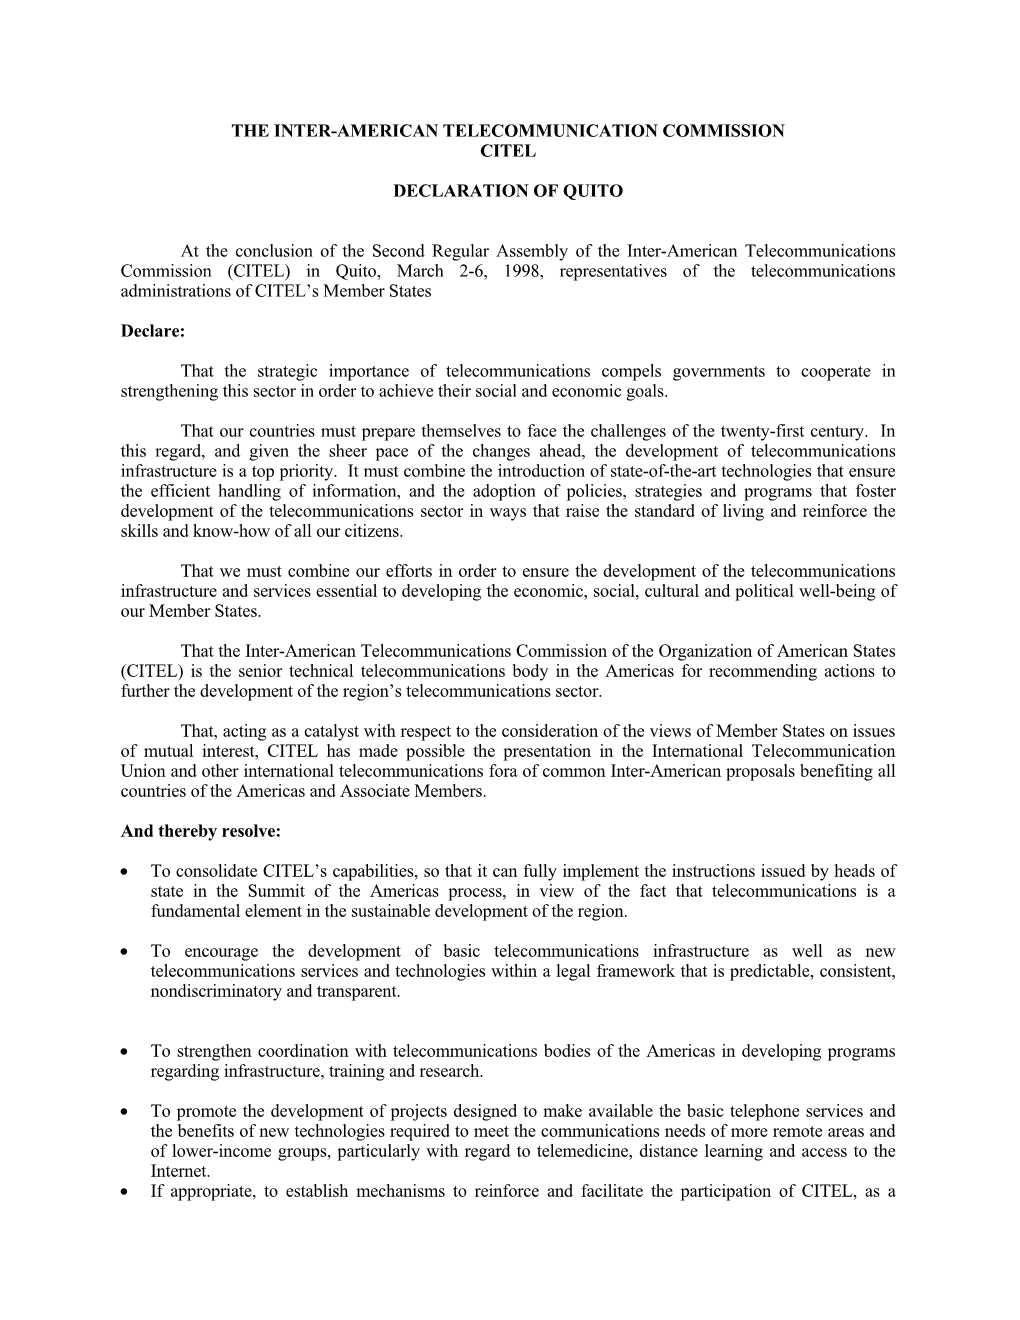 THE INTER-AMERICAN TELECOMMUNICATION COMMISSION CITEL DECLARATION of QUITO at the Conclusion of the Second Regular Assembly of T